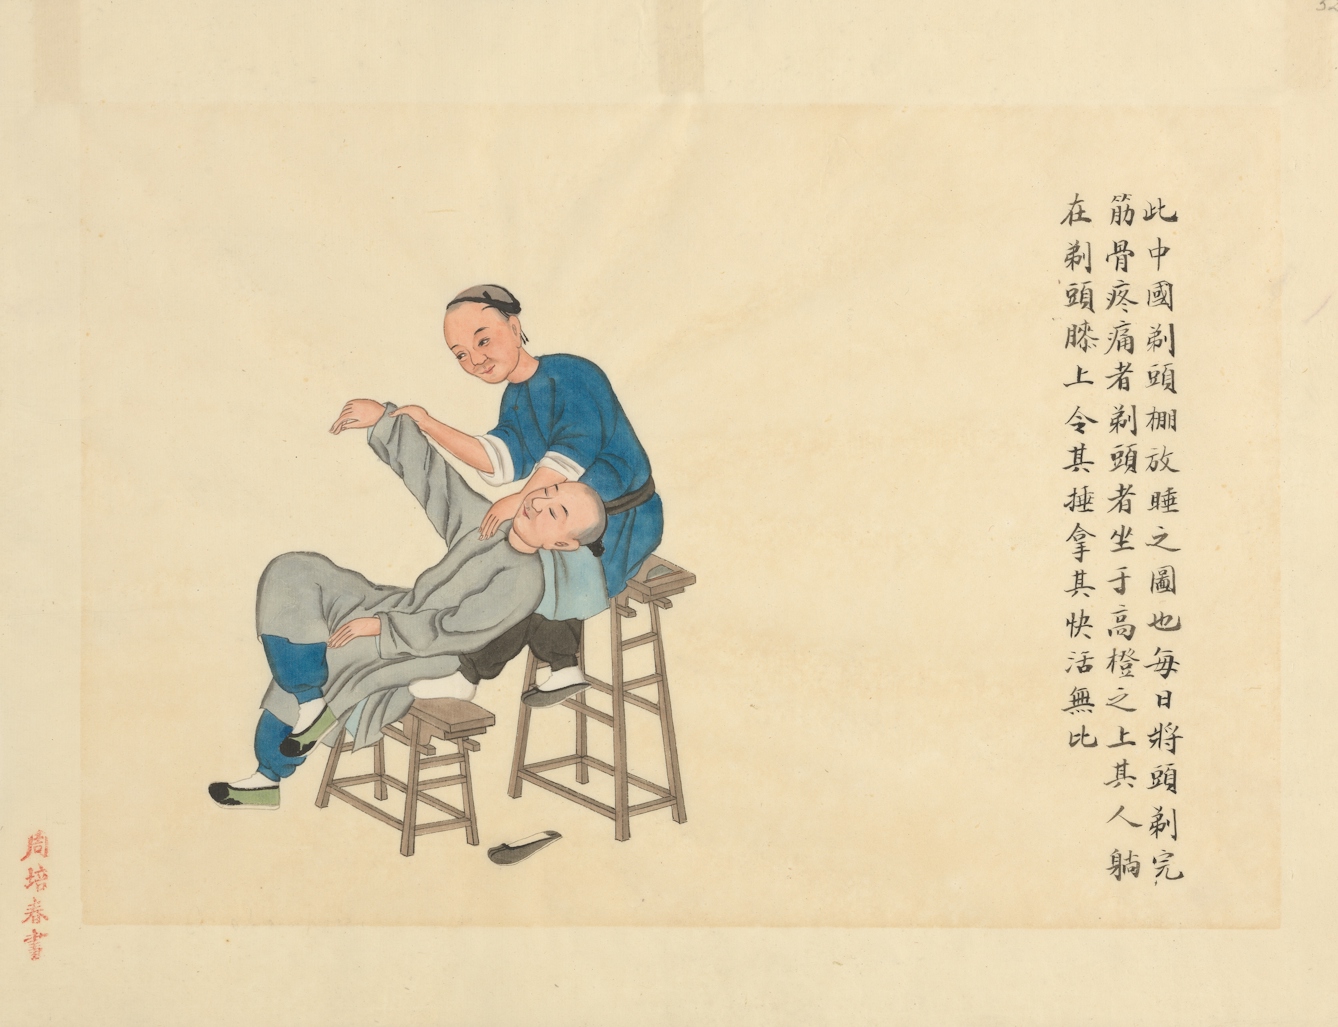 Photograph of a watercolour depicting Chinese medicine where a practitioner massages a patient's shoulder. Watercolour by Zhou Pei Qun, ca. 1890.